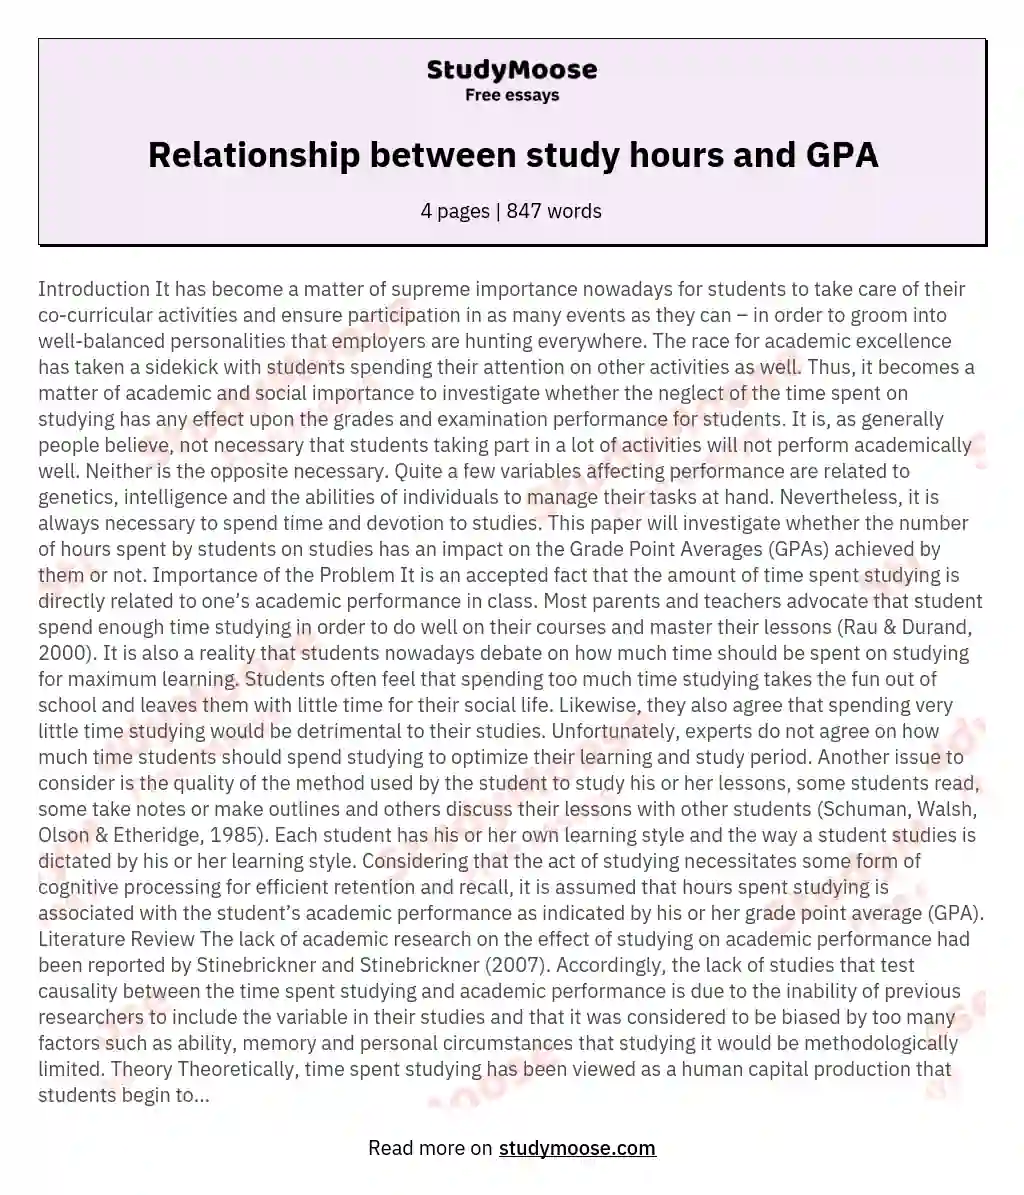 Relationship between study hours and GPA essay